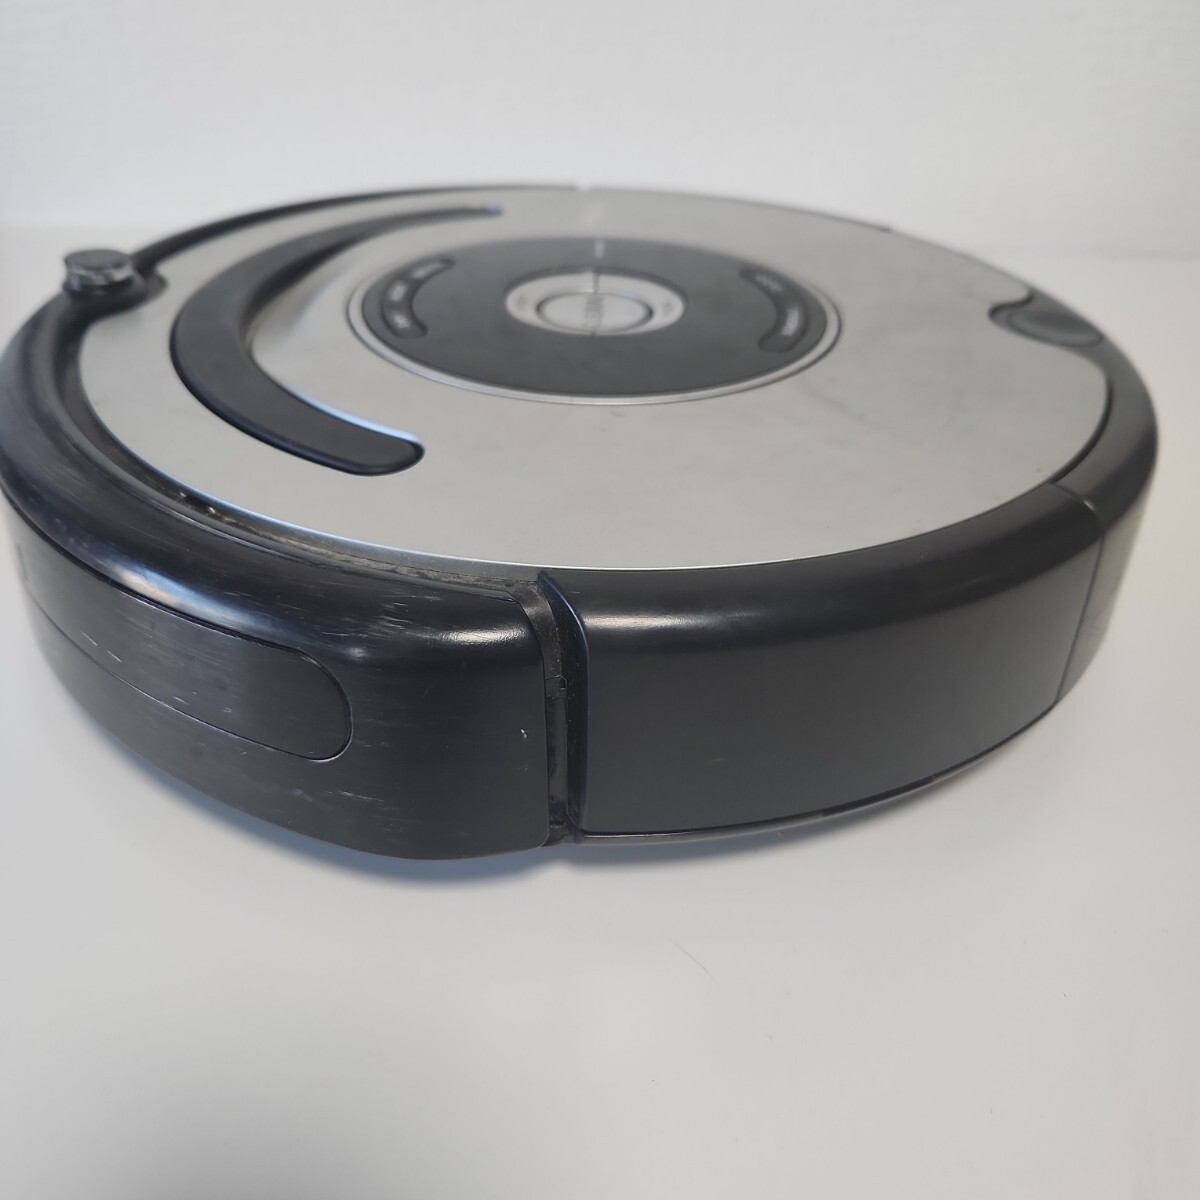 Roomba roomba 577 normal operation goods accessory great number 